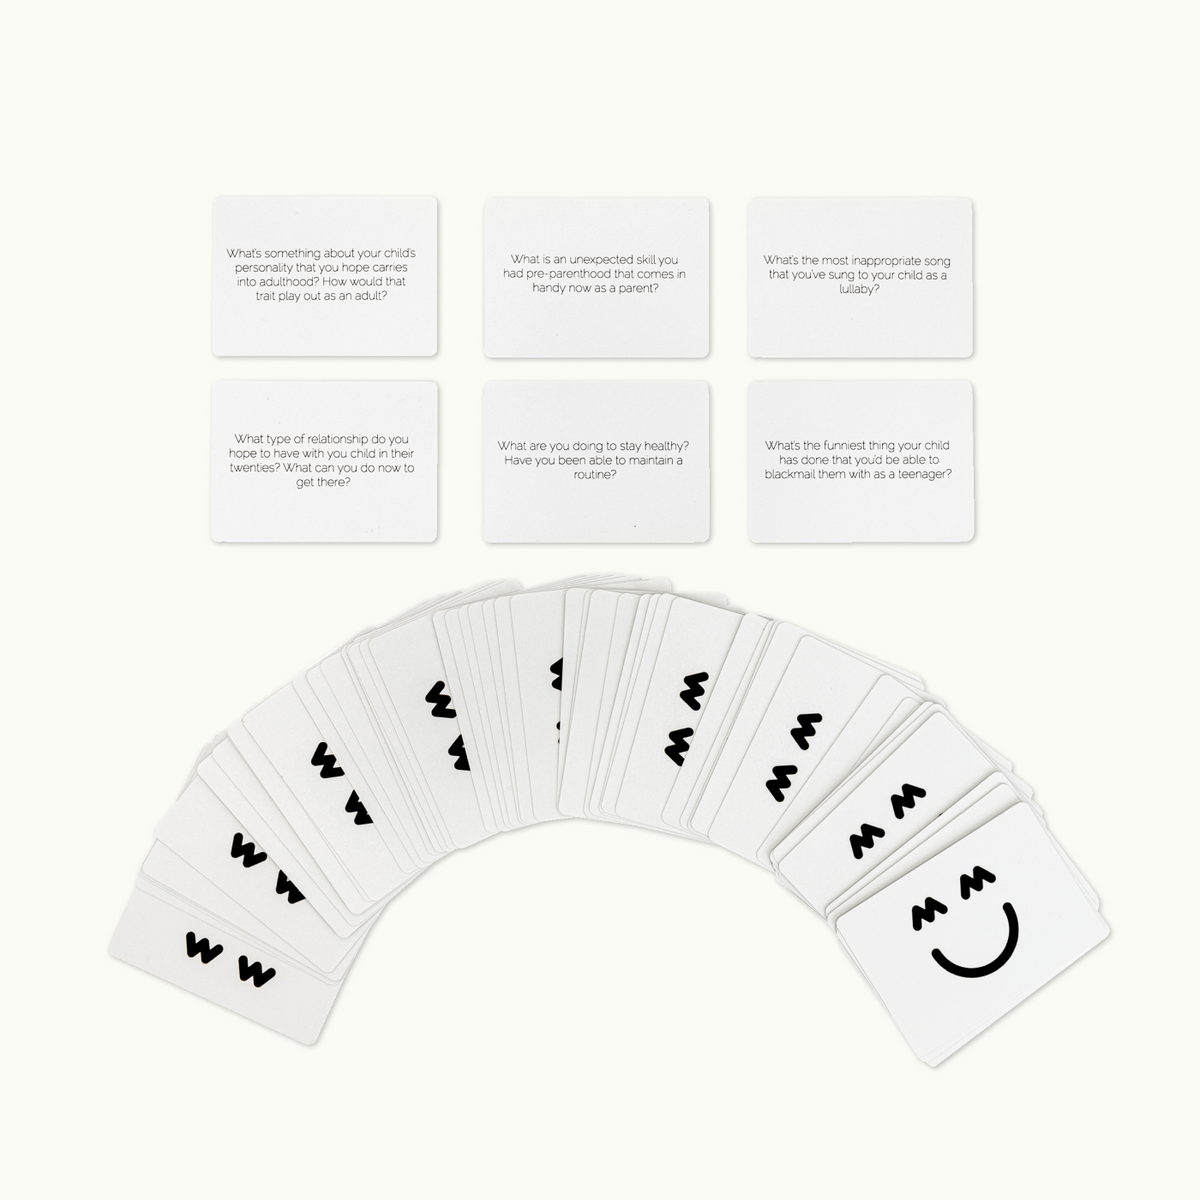 Set of cards laid out with some example questions shown